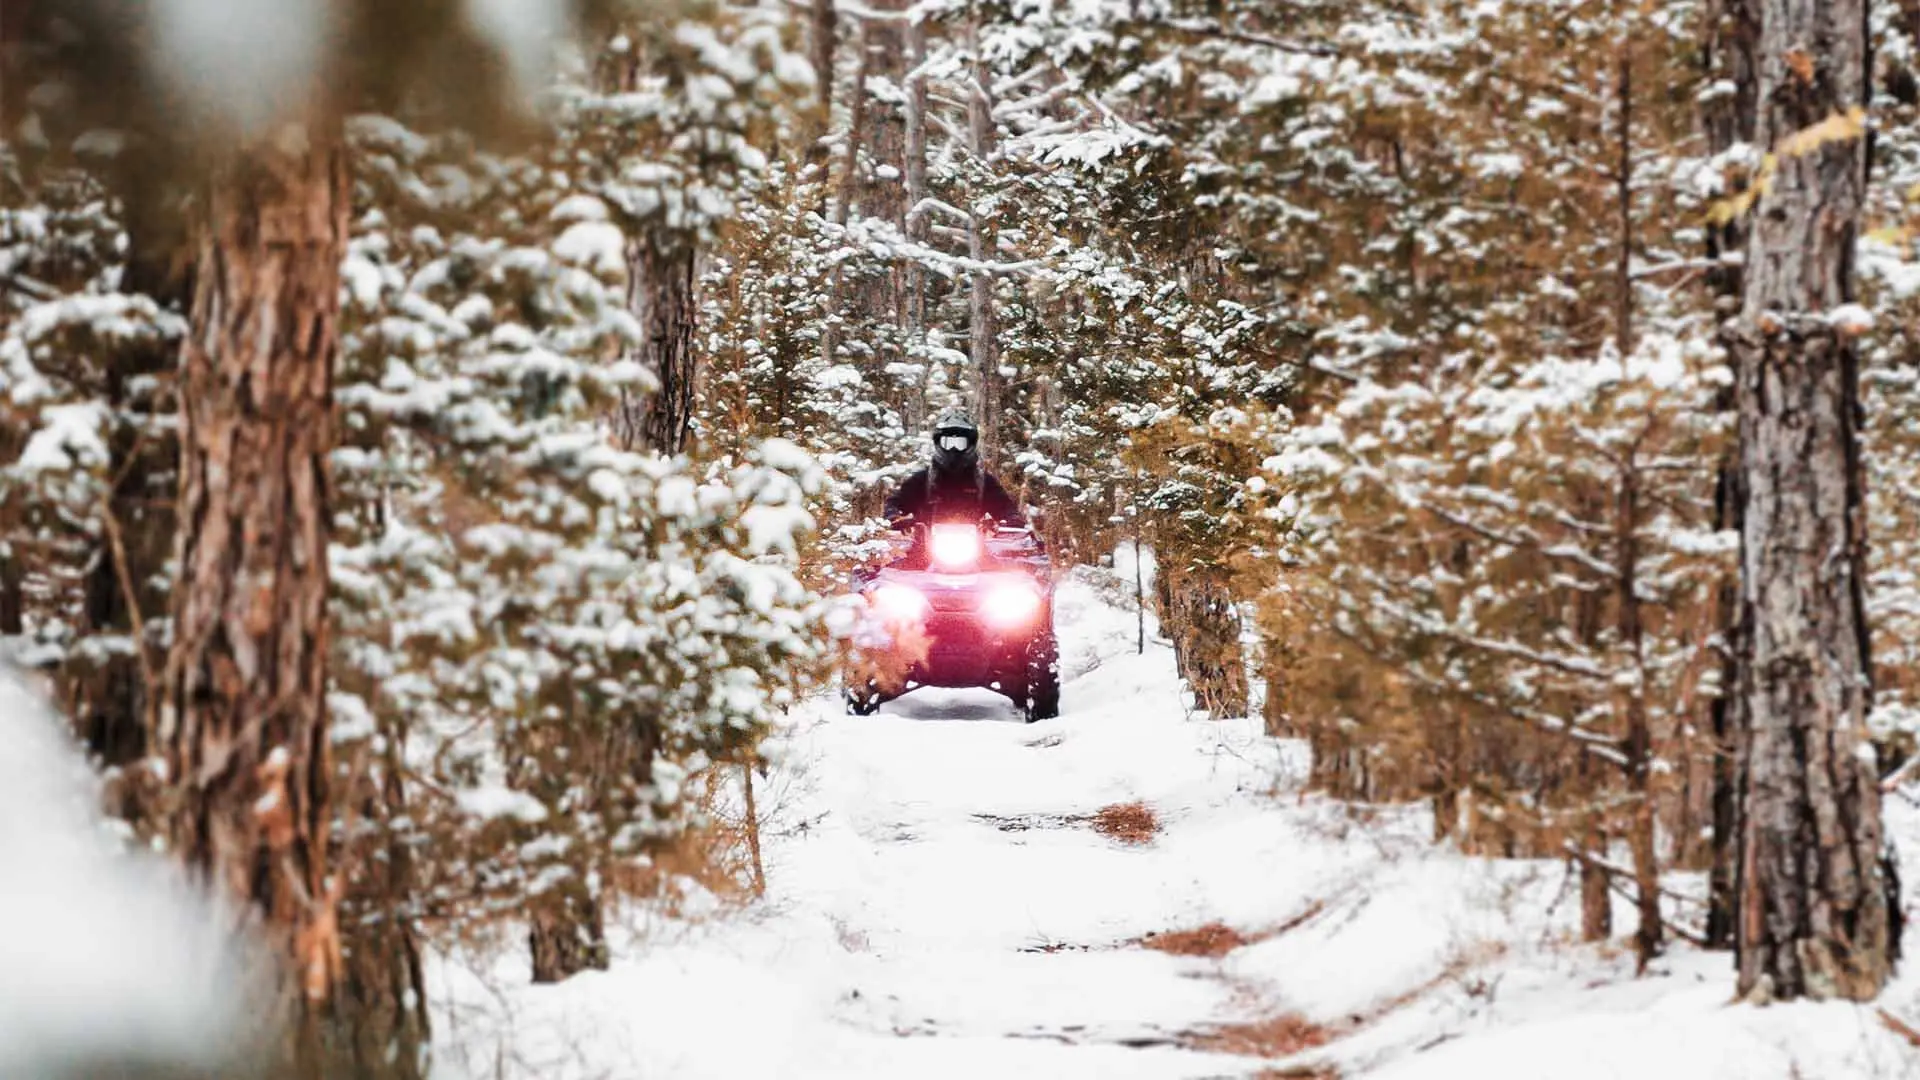 Person driving an ATV down a forested snowy trail.